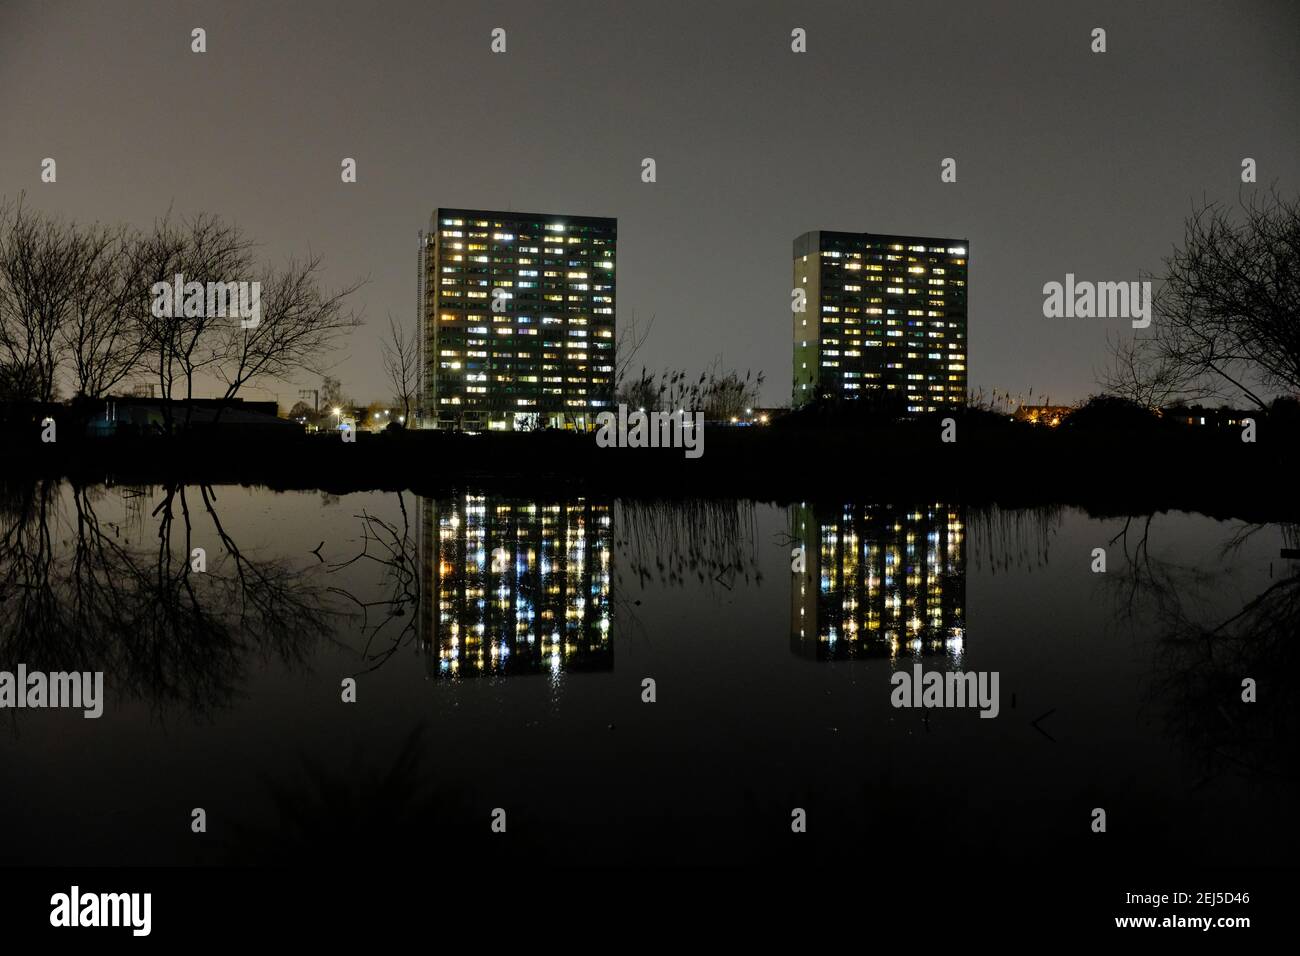 WANSTEAD FLATS, LONDON - 21ST FEBRUARY 2021: Fred Wigg and John Walsh towers at Harrow Road playing fields. Reflecting in water at night. Stock Photo